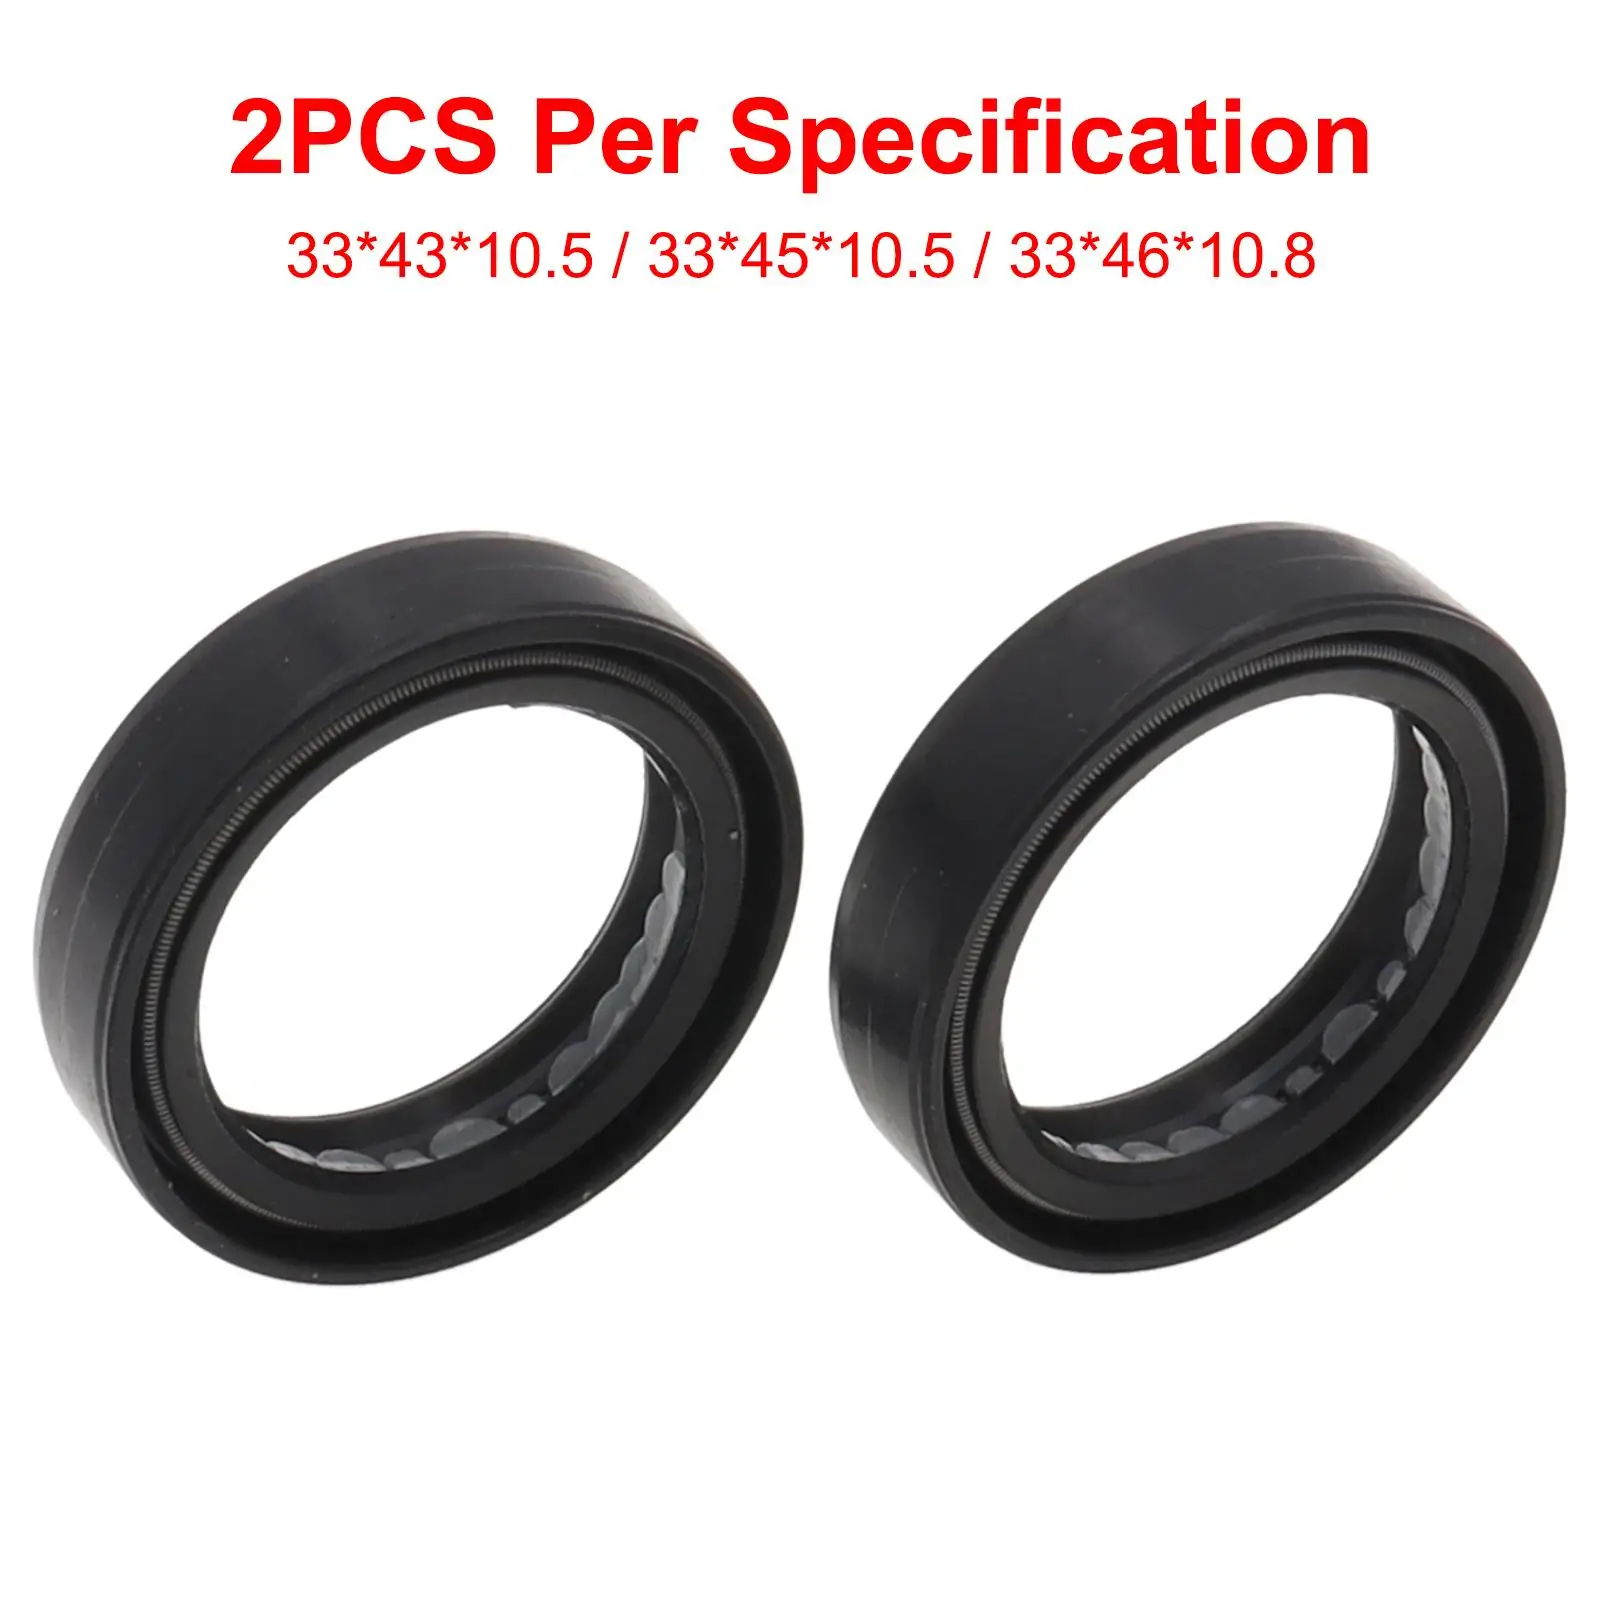 Premium Motorcycle Front Fork Damper Oil Seal High Performance Crf XR Ttr Drive Shaft Oil Seal for Motorcycle Replacement